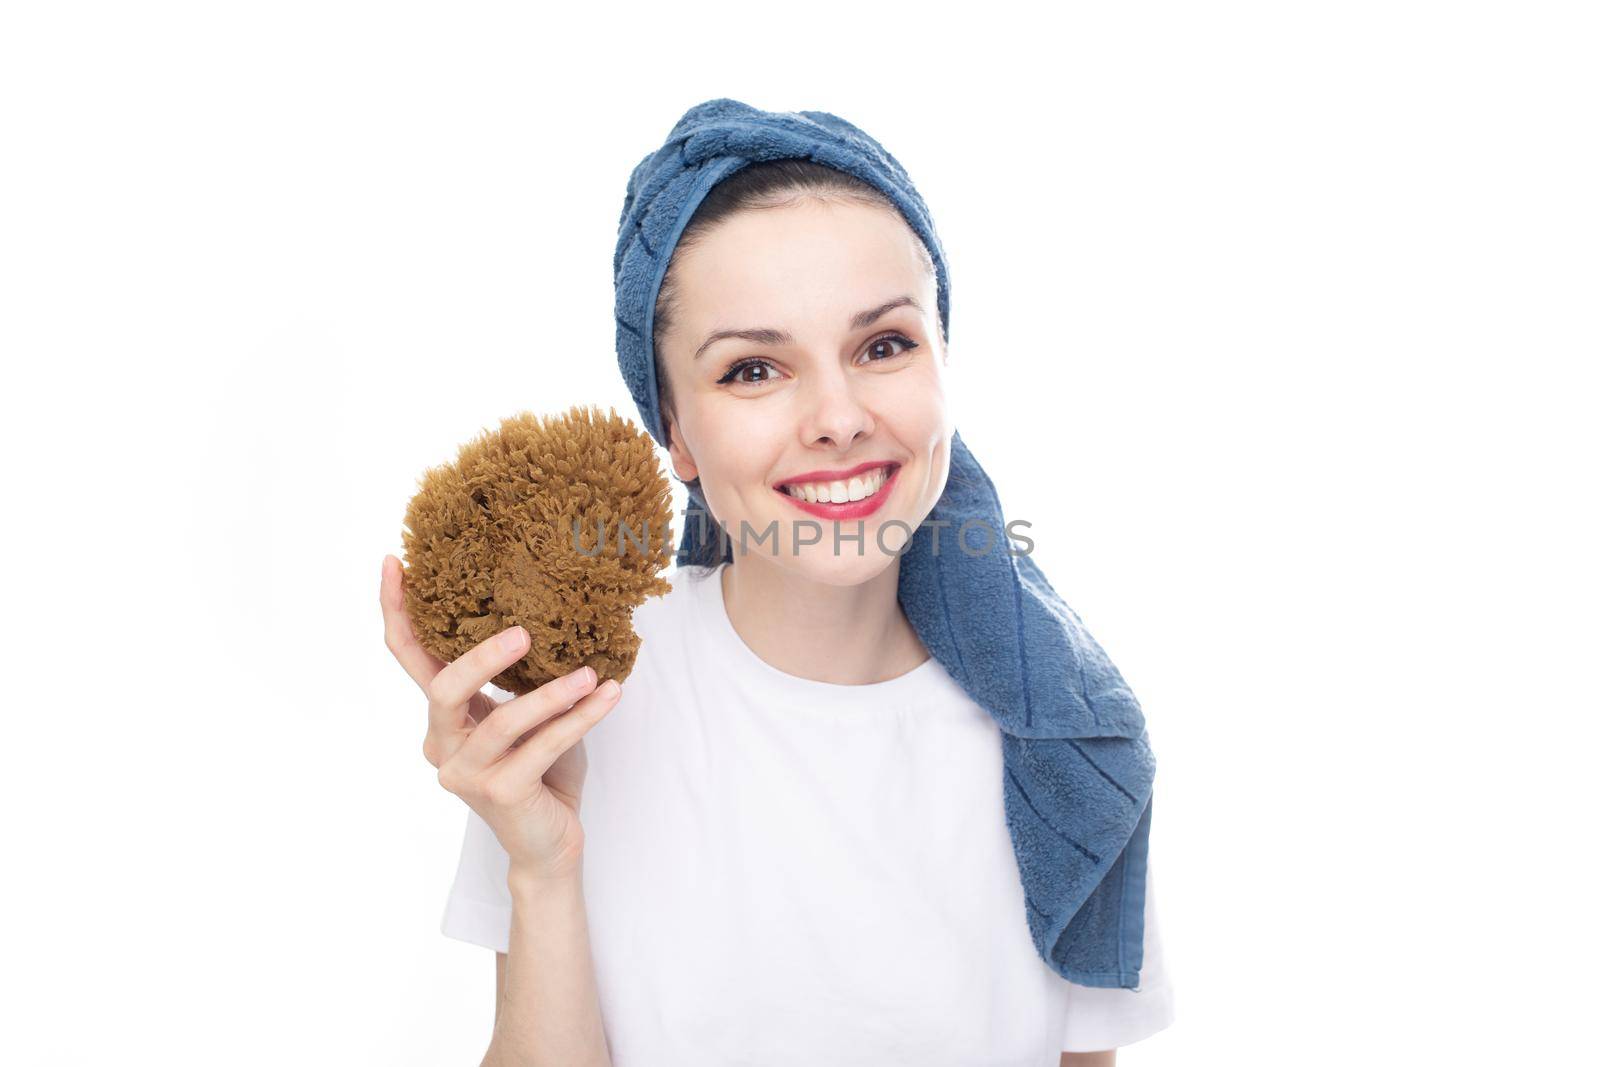 smiling woman in a white t-shirt and a blue towel on her head holds a body washcloth made of natural seaweed in her hand, white studio background. High quality photo